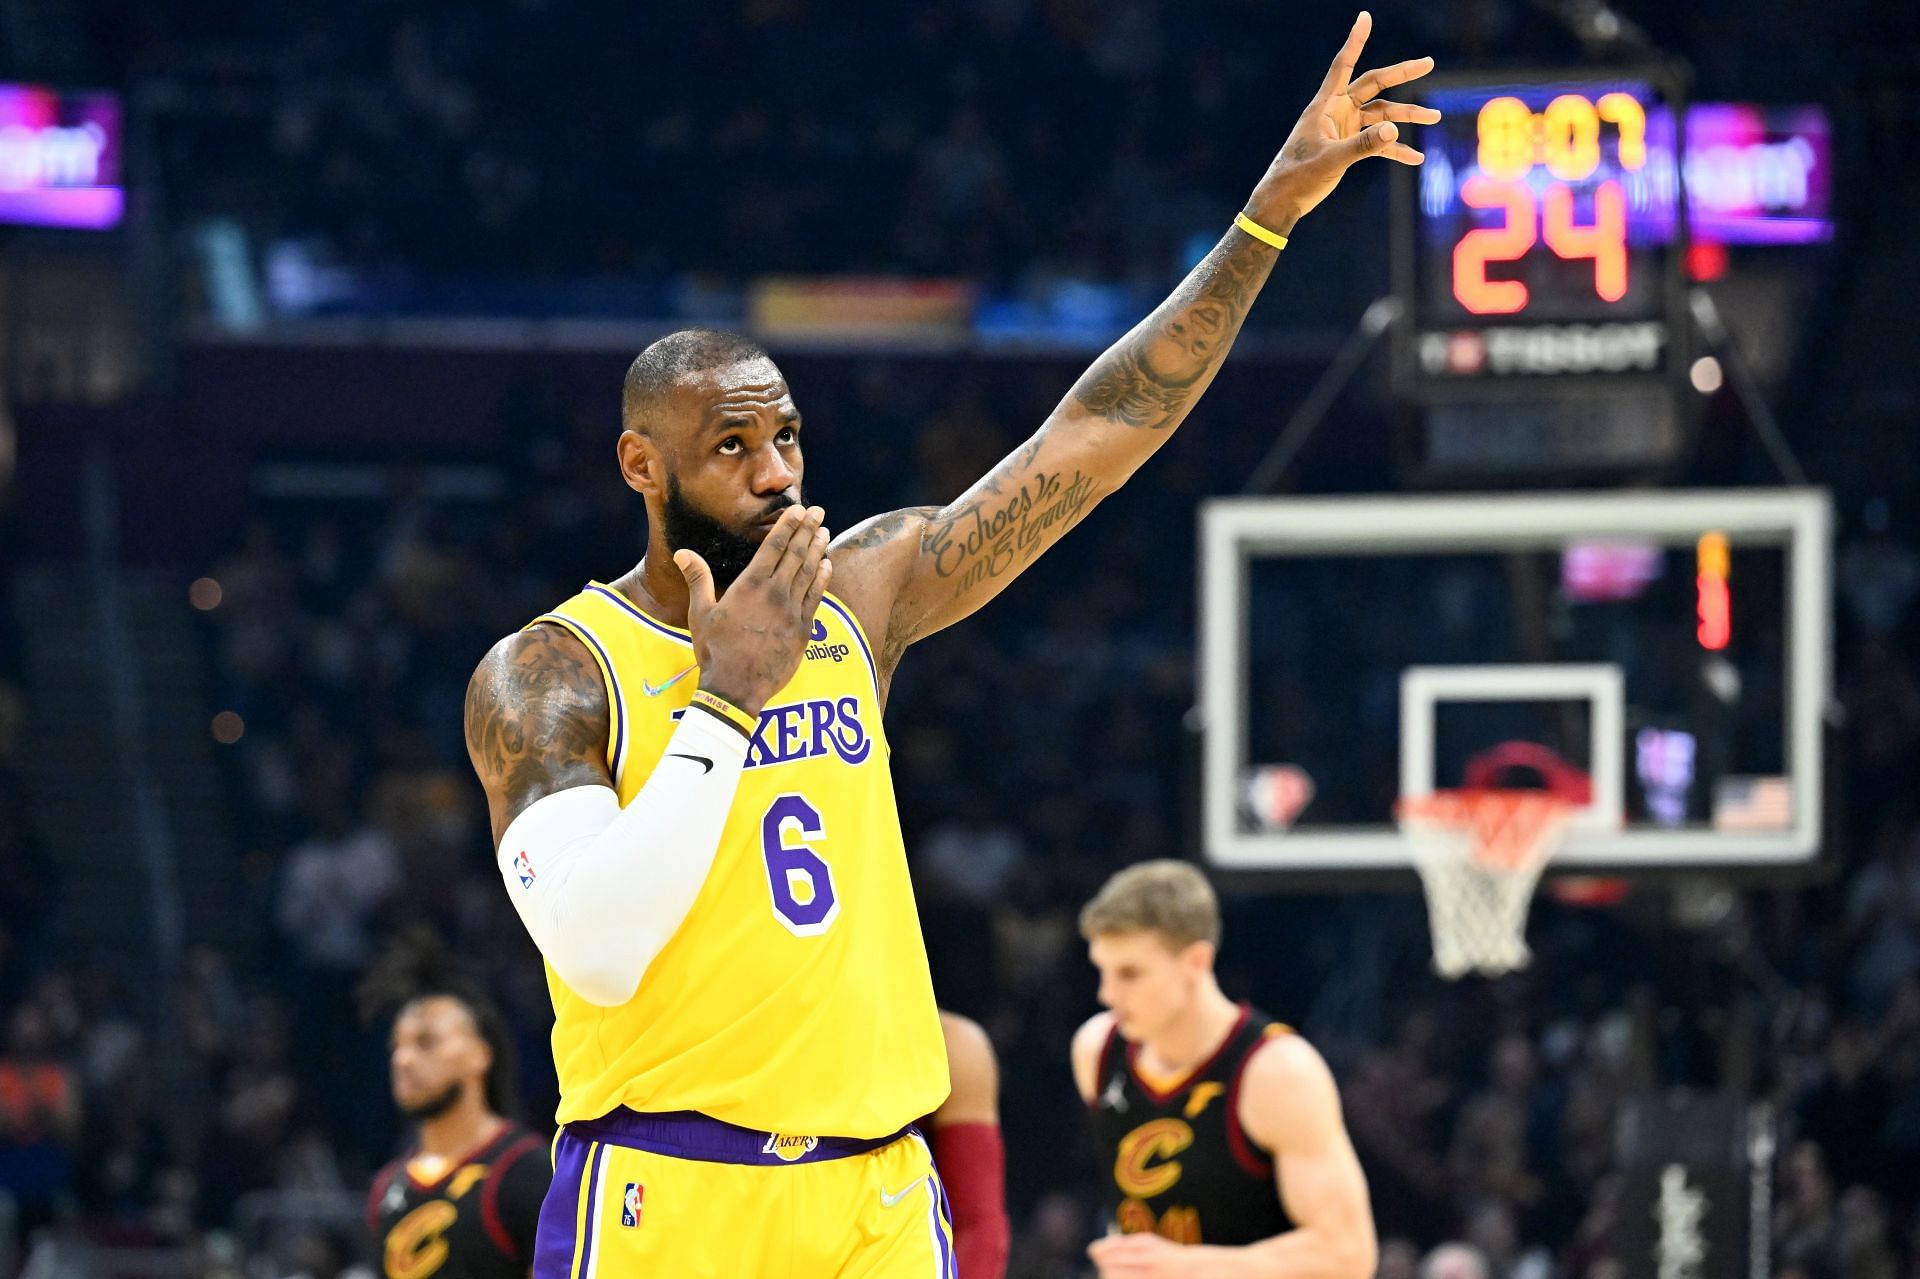 Los Angeles Lakers v Cleveland Cavaliers; LeBron James celebrates with the crowd